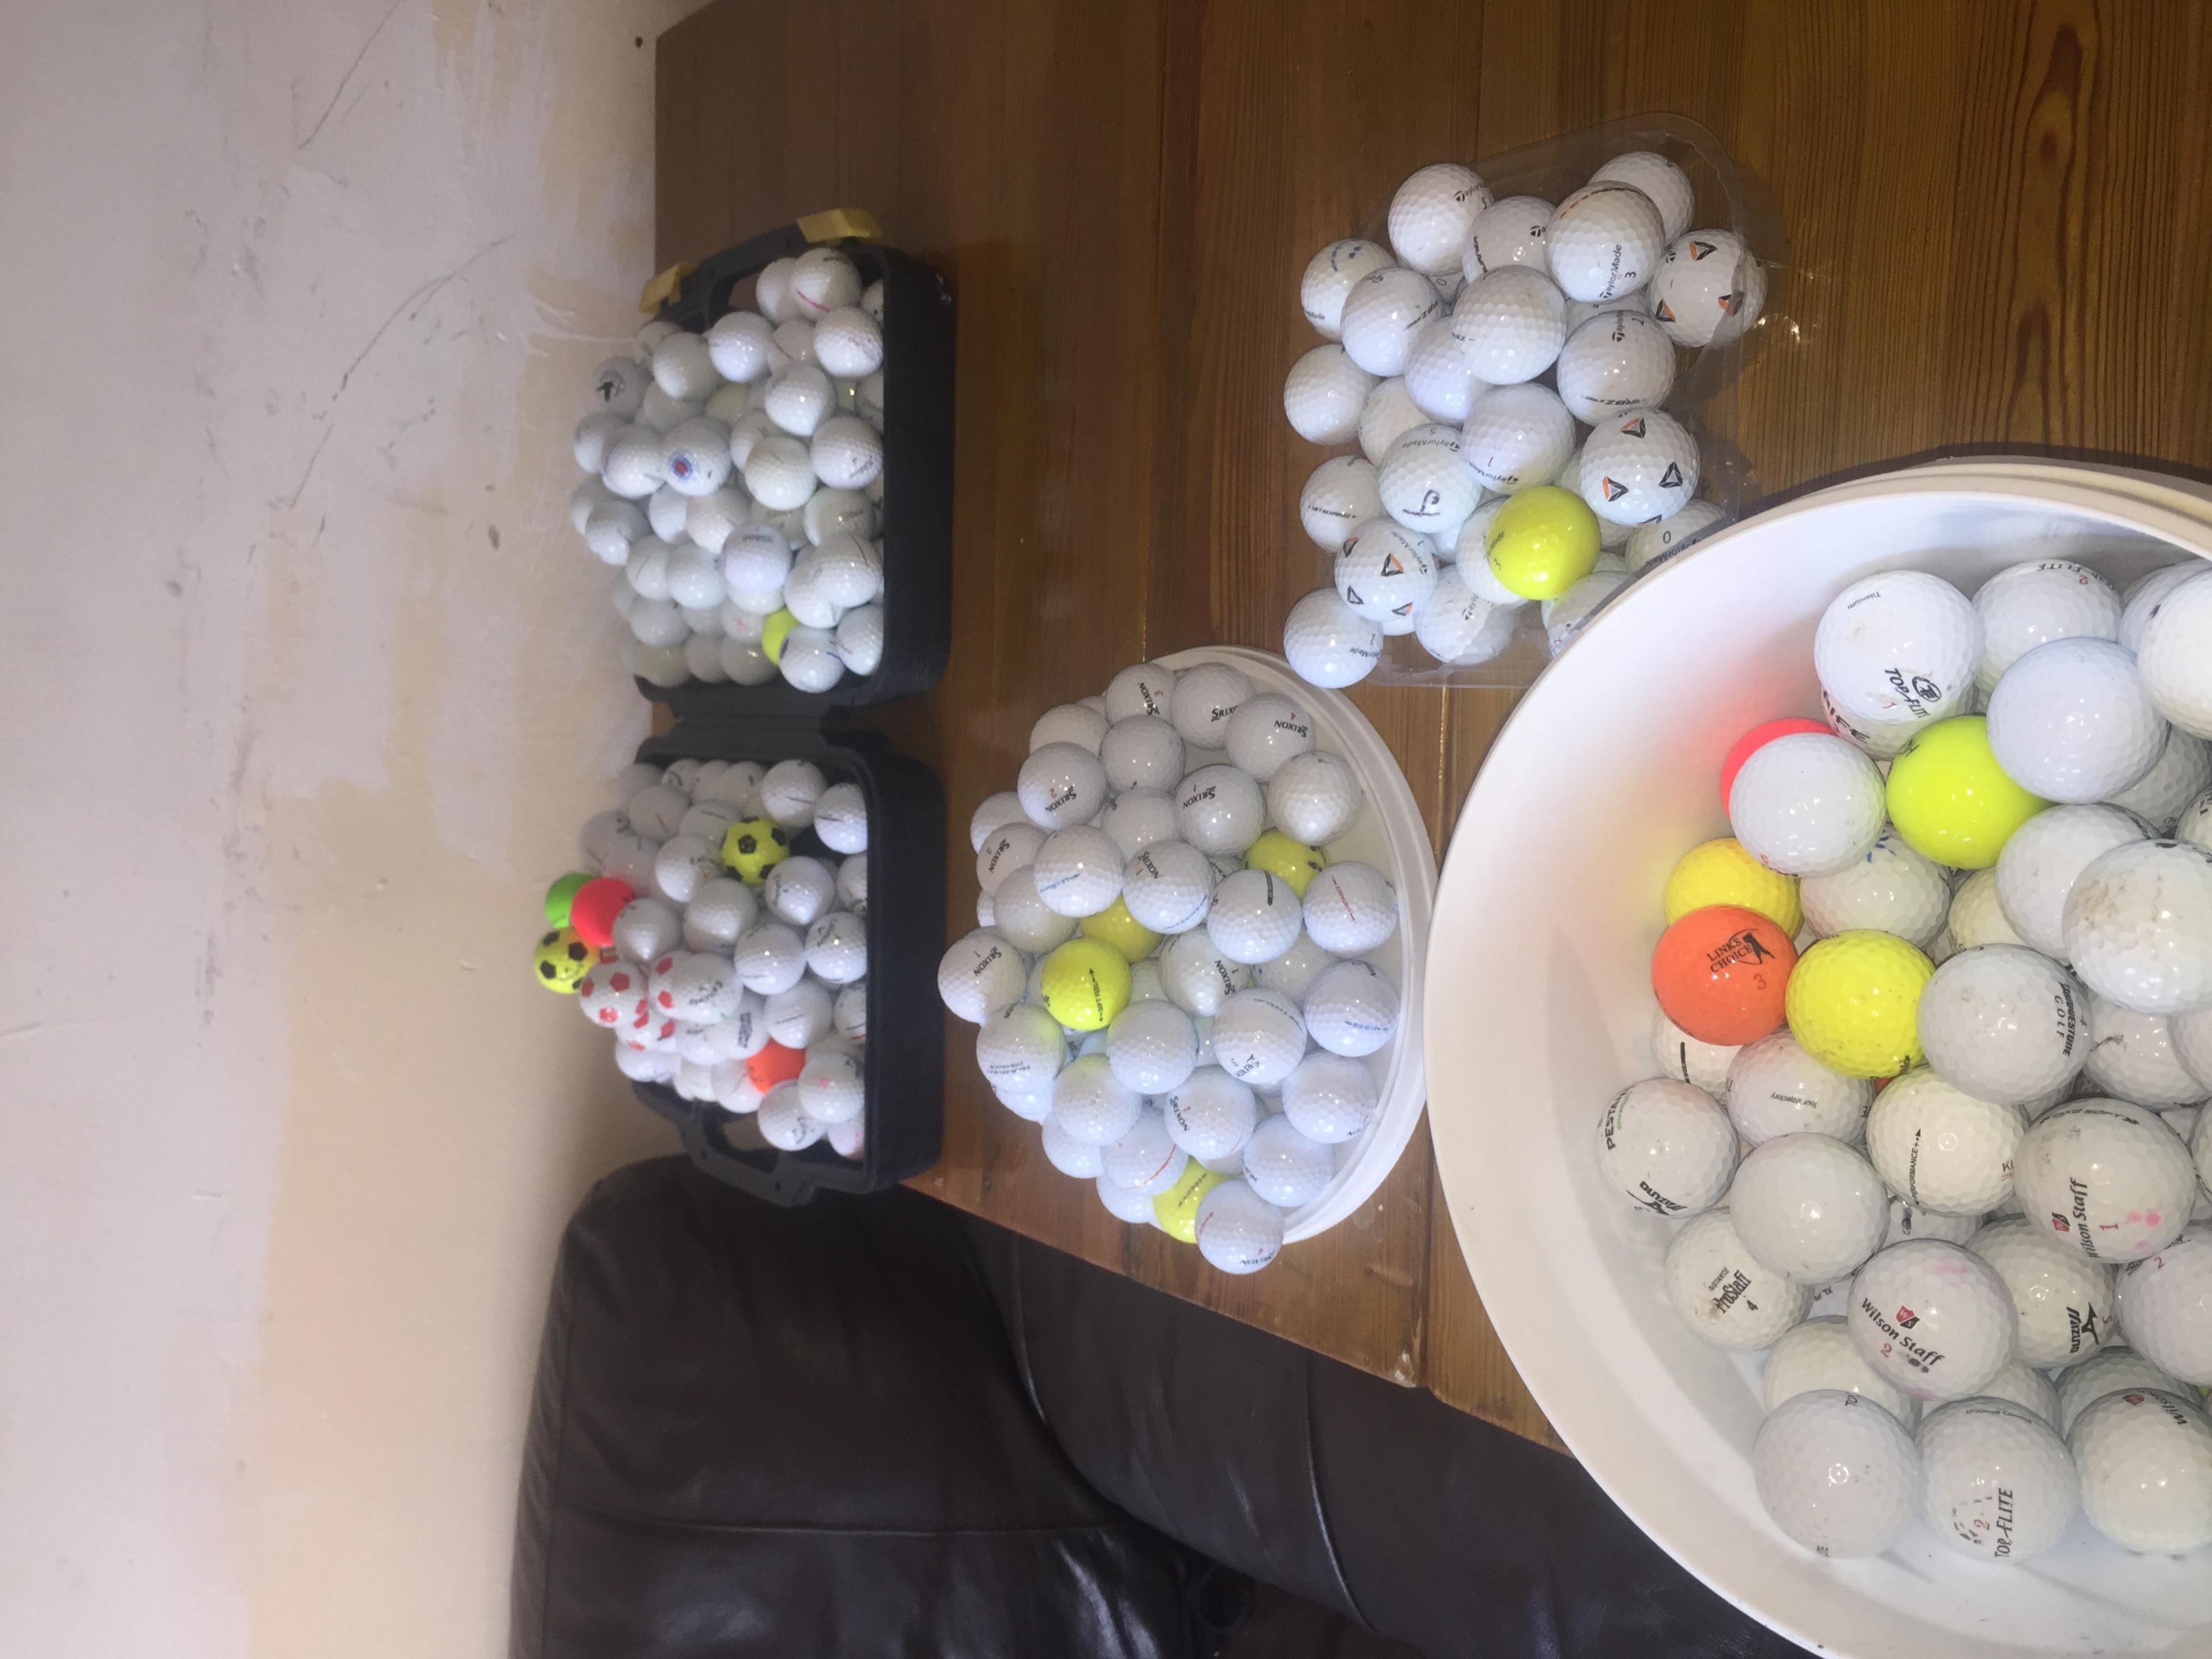 430 GOLF BALLS (minted condition)